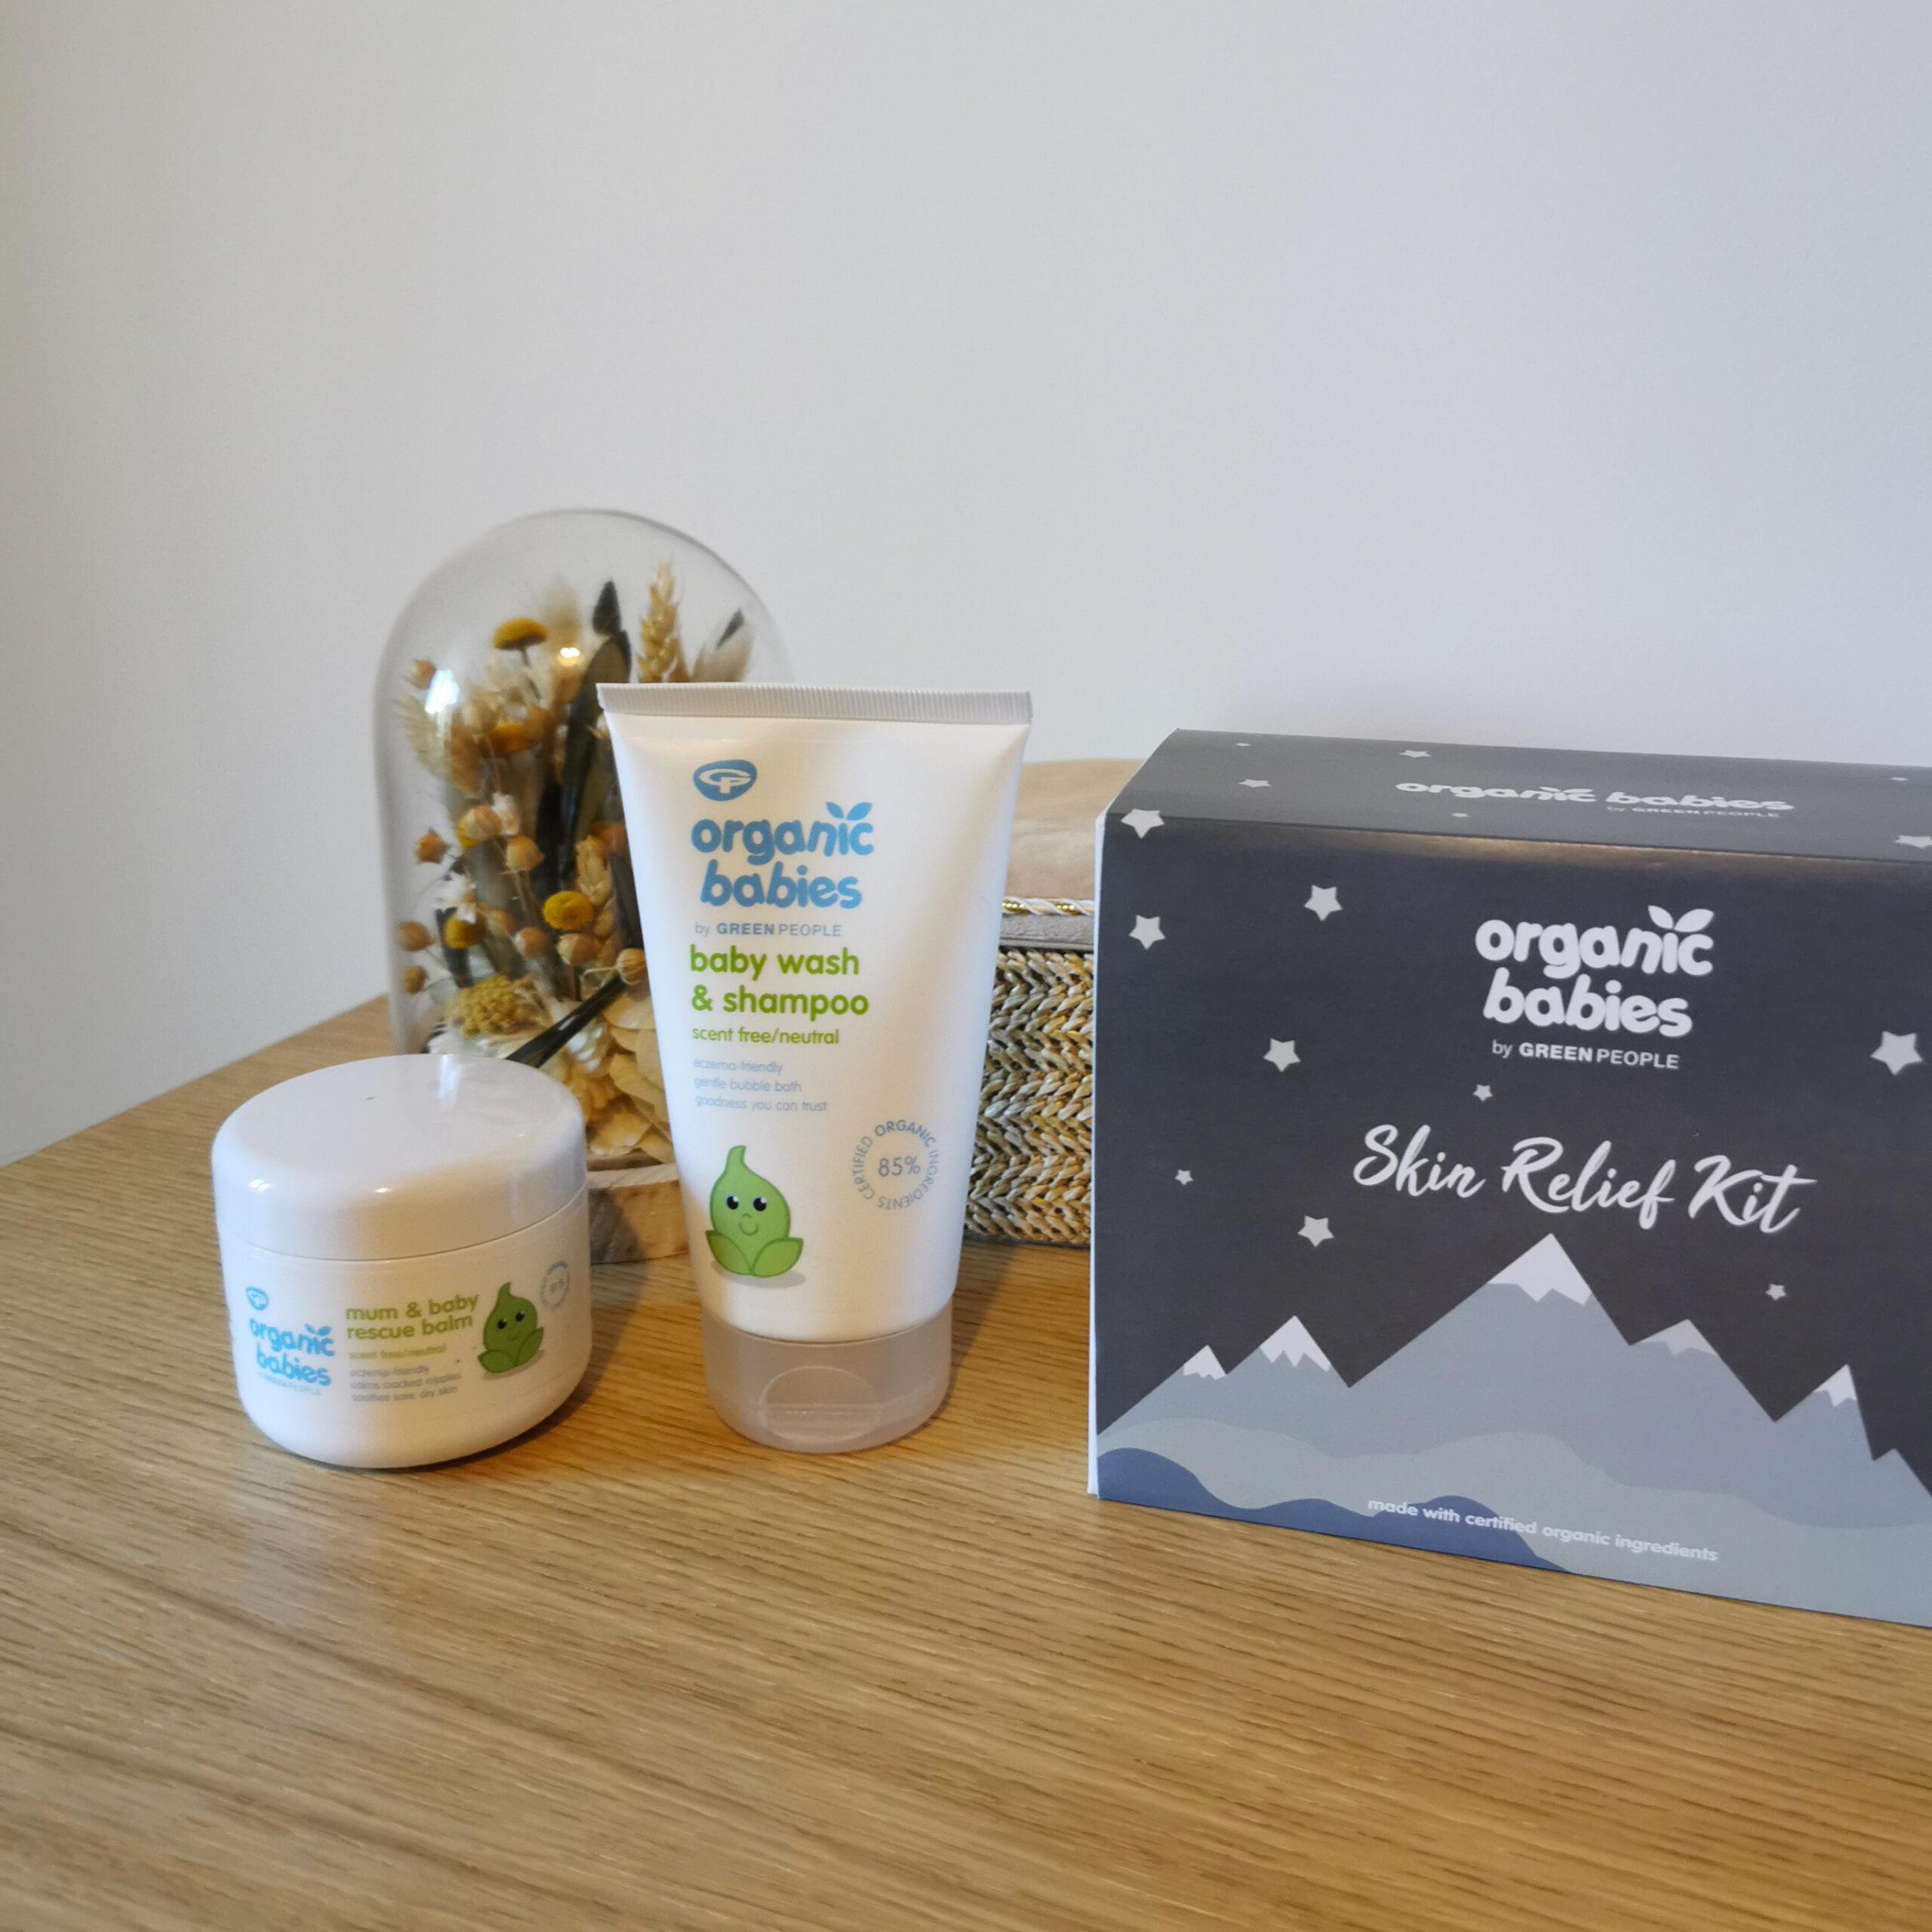 Organic Babies Skin Relief Kit, Green People, Baby Kit, Skincare Set, Organic Beauty, Organic Products, Vegetarian, Cruelty-free, Xmas Giveaways, Frenchie Christmas Giveaways, Win, Competitions, Baby & Mama, bath products